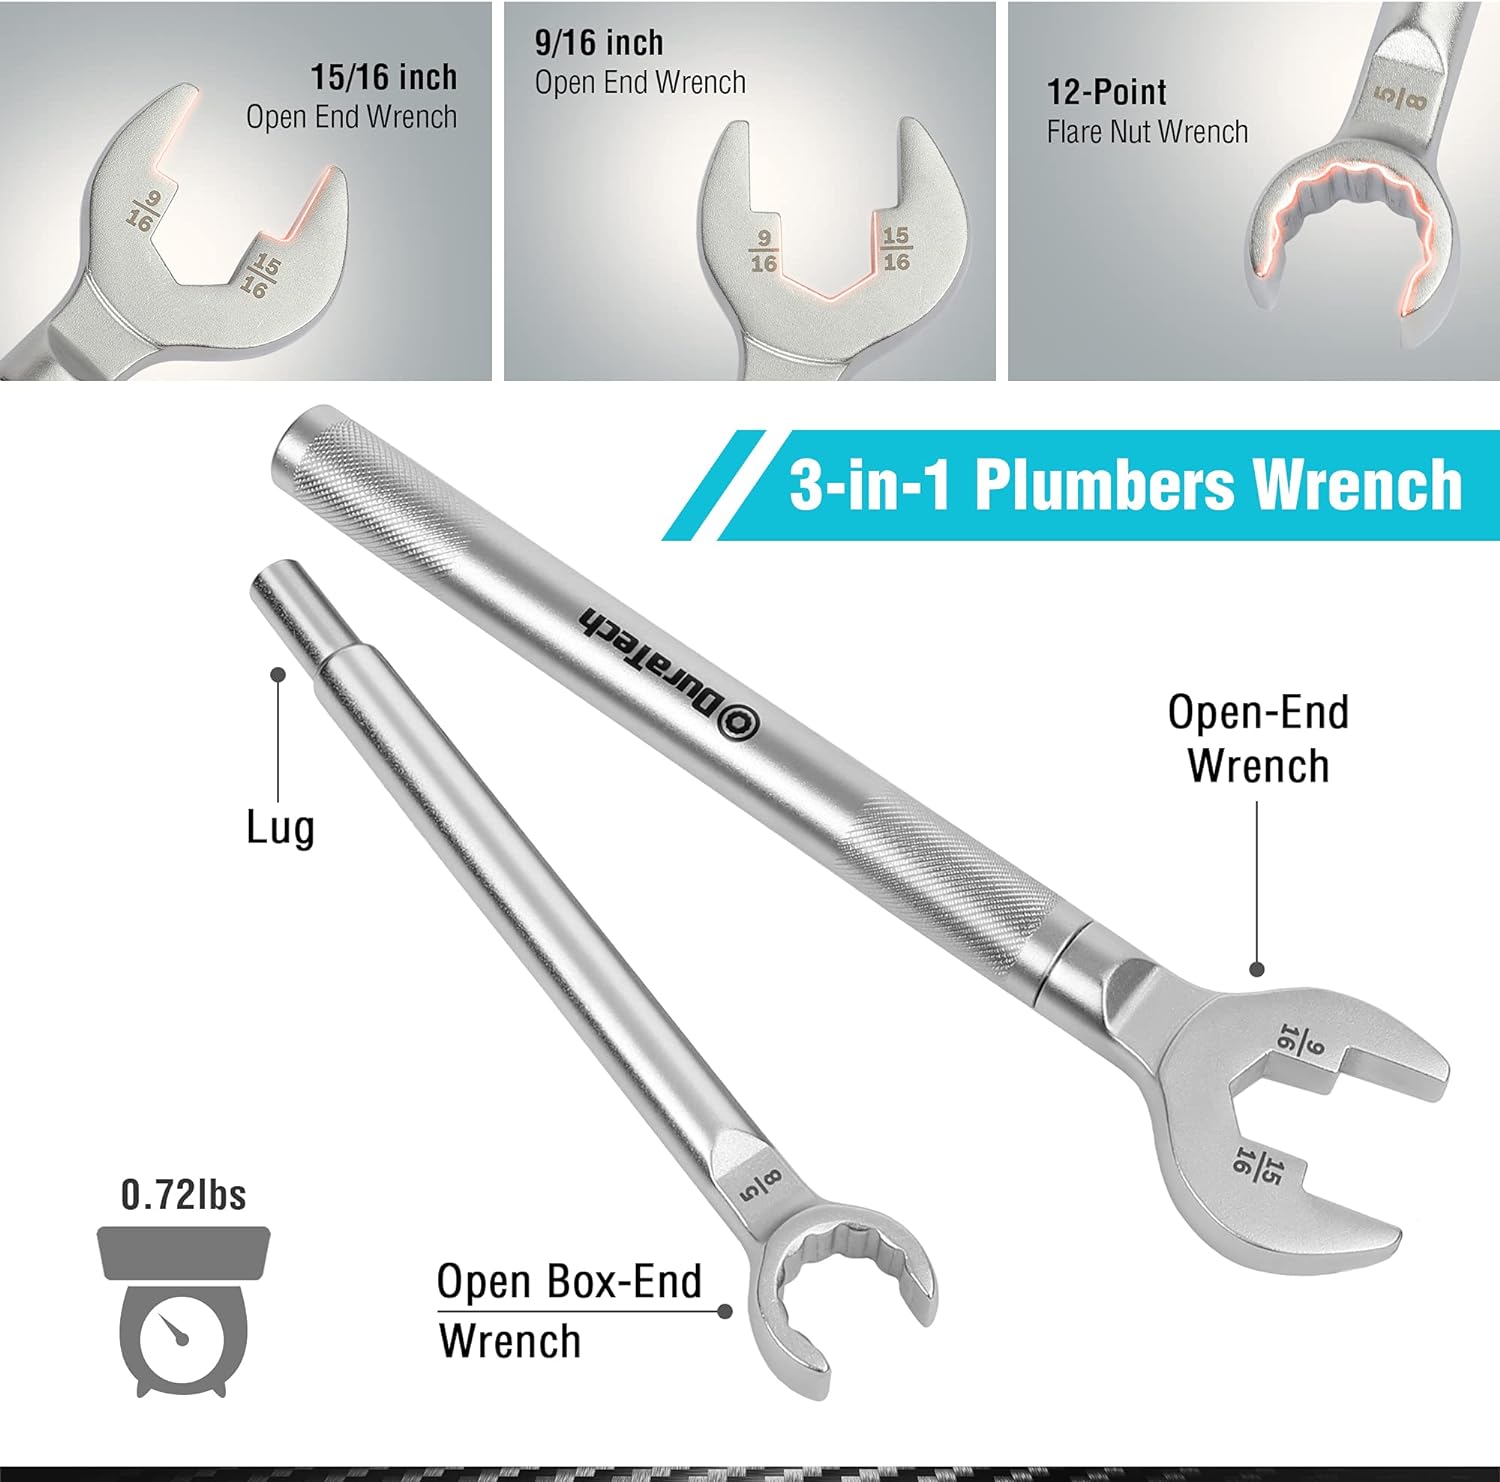 duratech 3 in 1 plumber wrench 4 way sillcock key 2 pack for valve faucet nuts and spigots 2